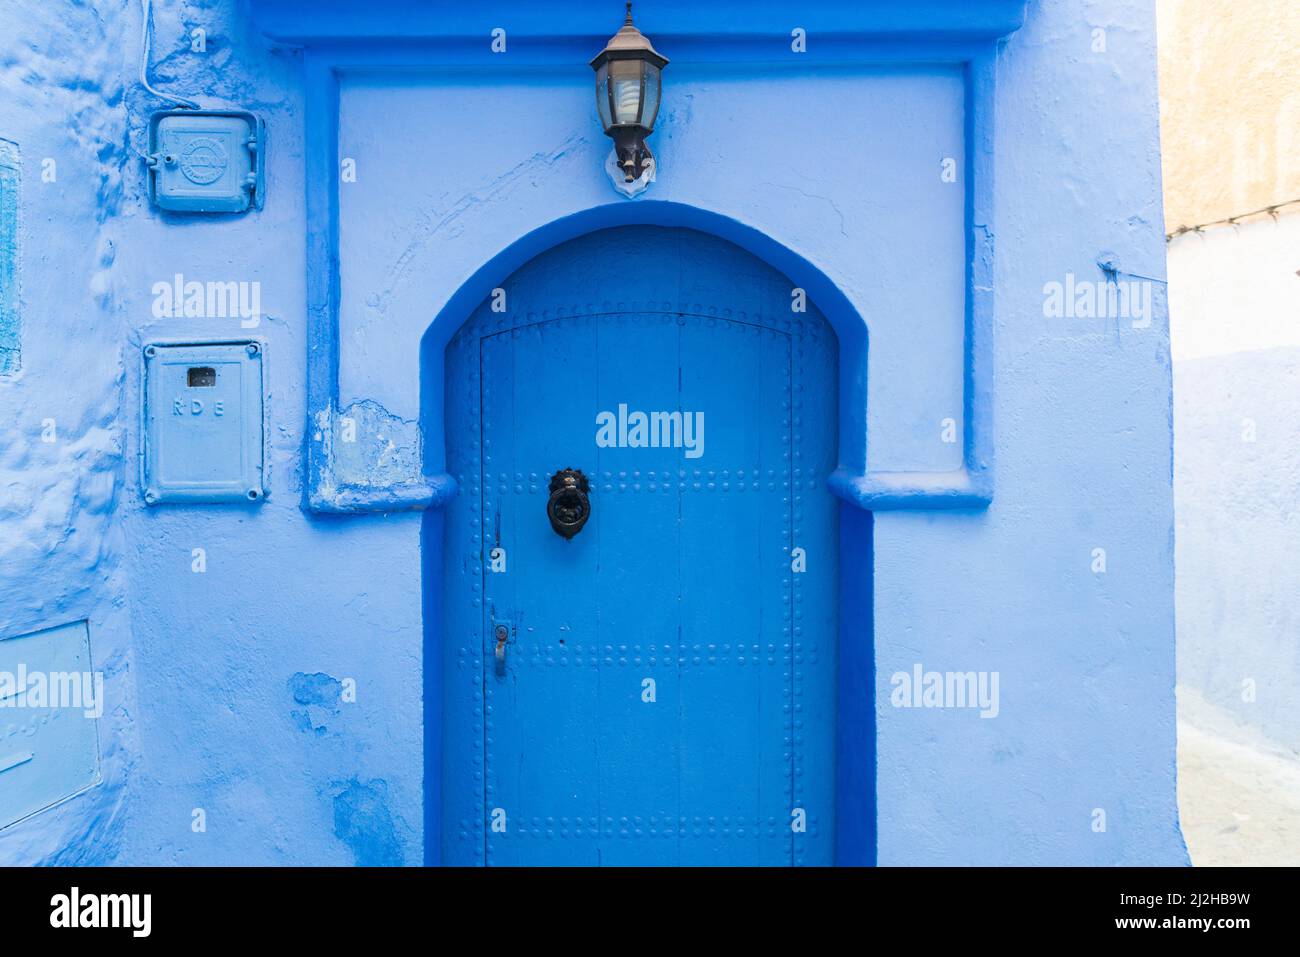 Morocco, Chefchaouen, Doors of traditional blue house Stock Photo